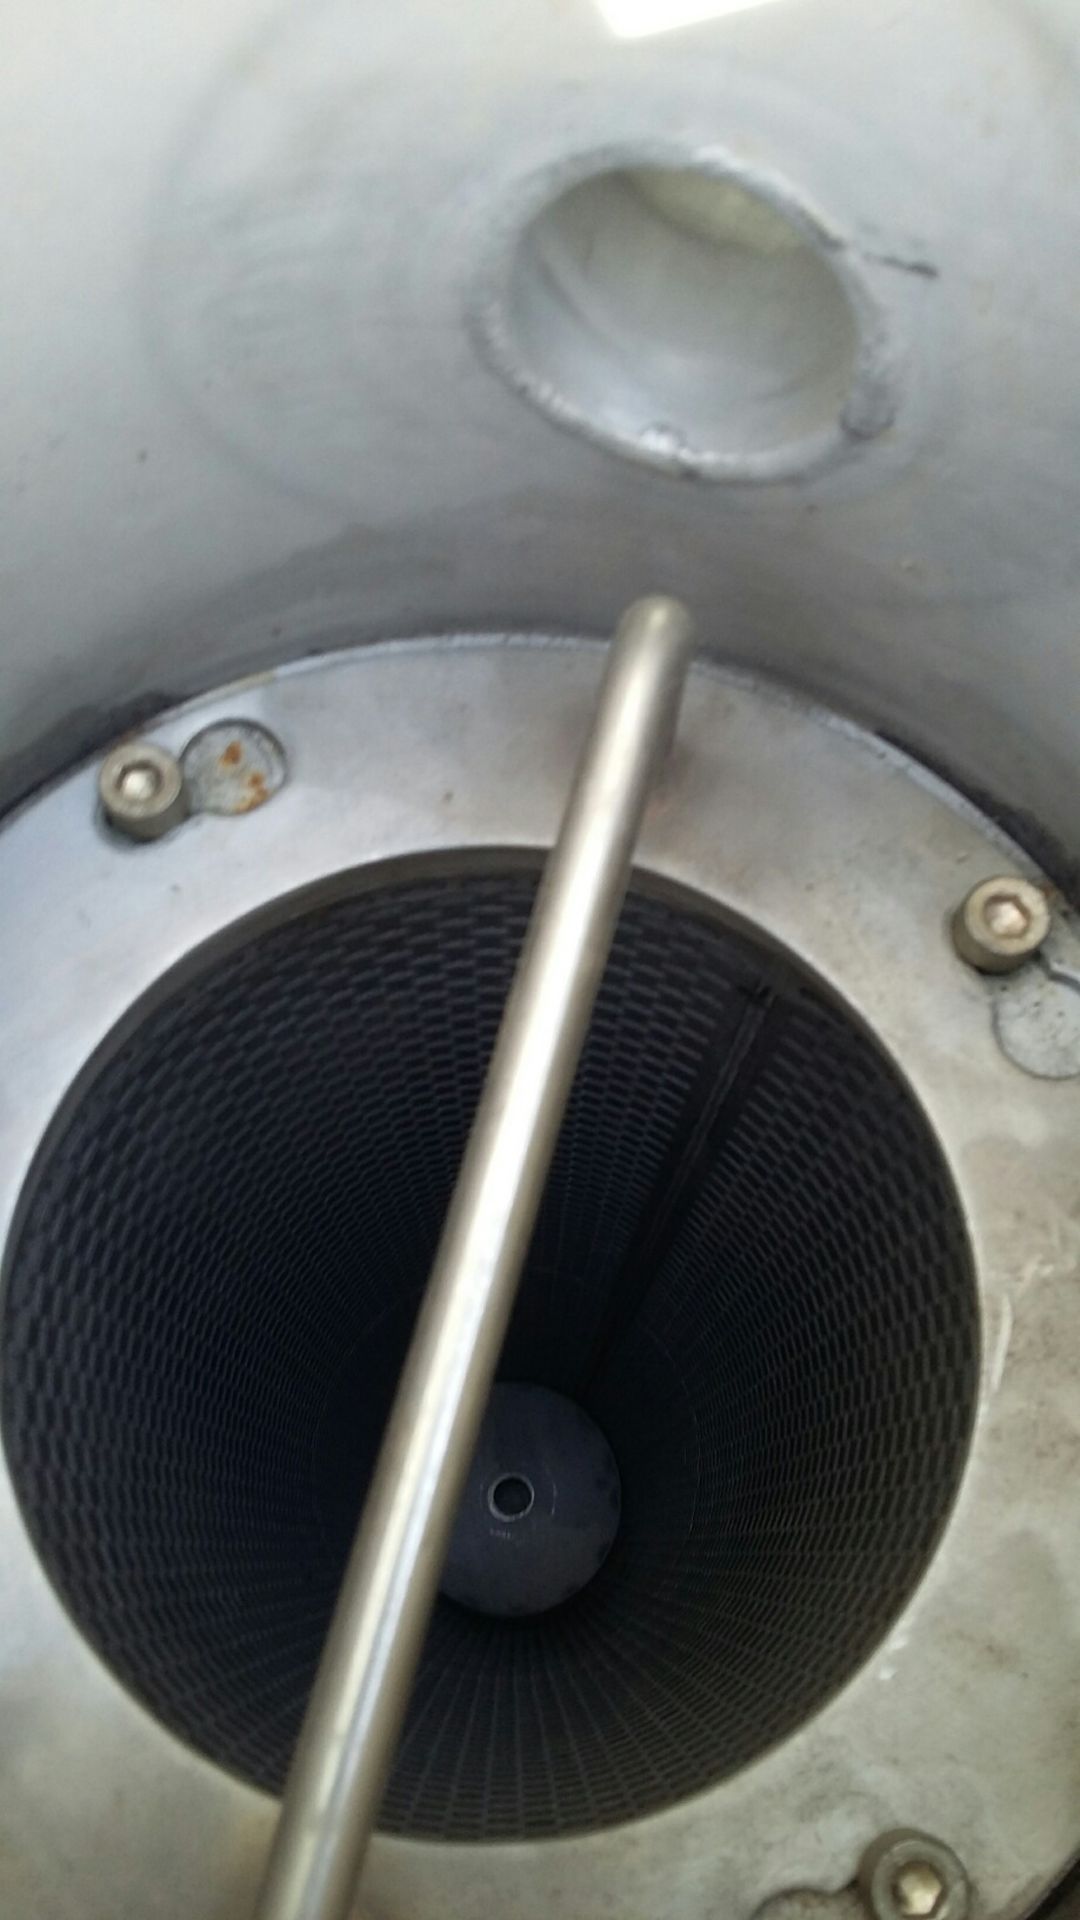 Pall Stainless Steel Inline Filter, 10 bar working - Image 3 of 3